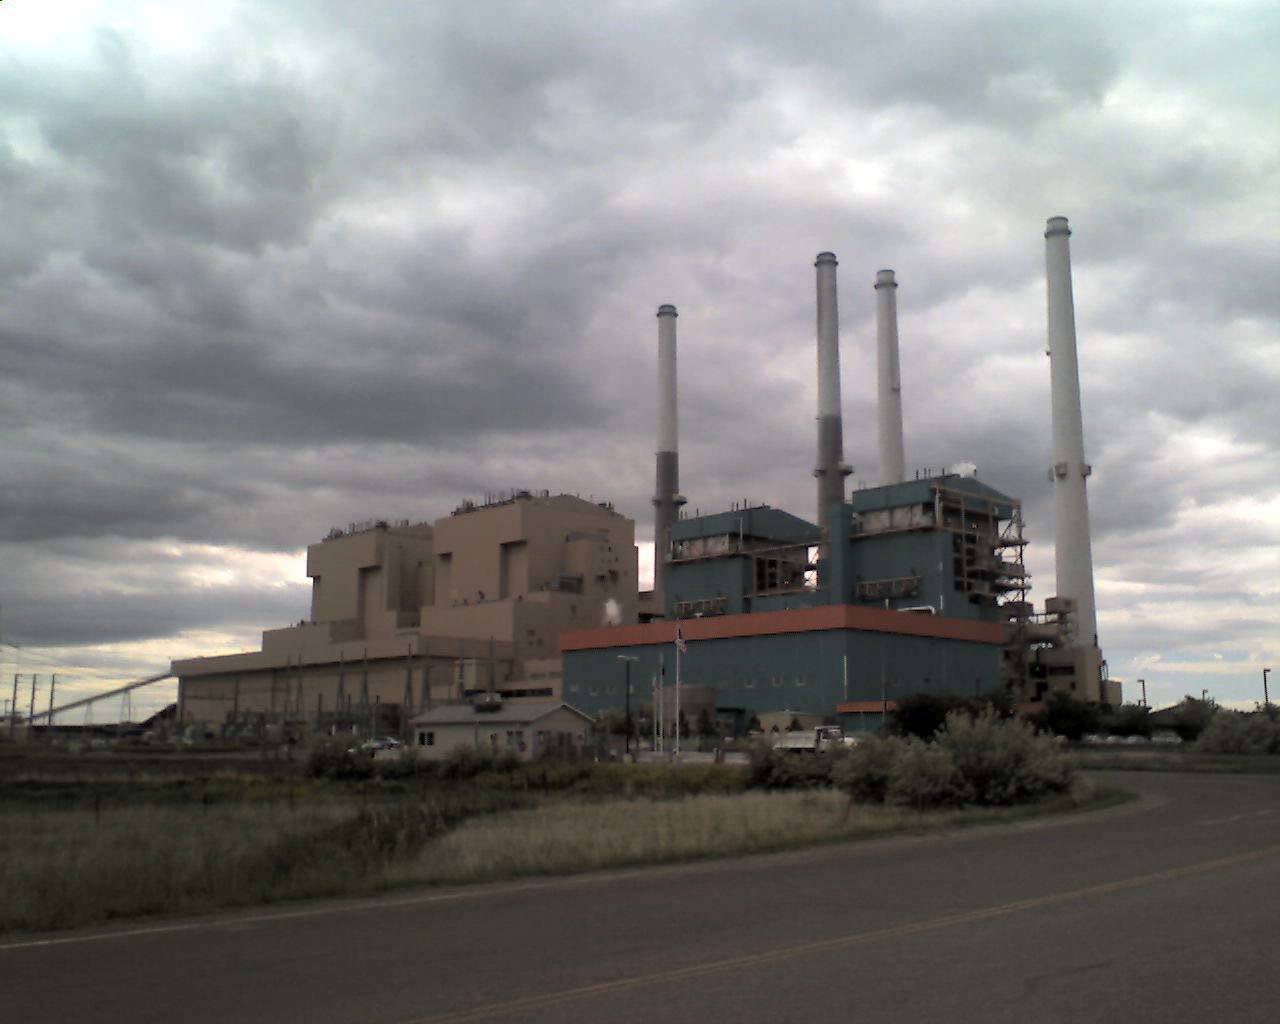 The Colstrip Power Plant in Montana. Puget Sound Energy owns 25 percent of the remaining two units.